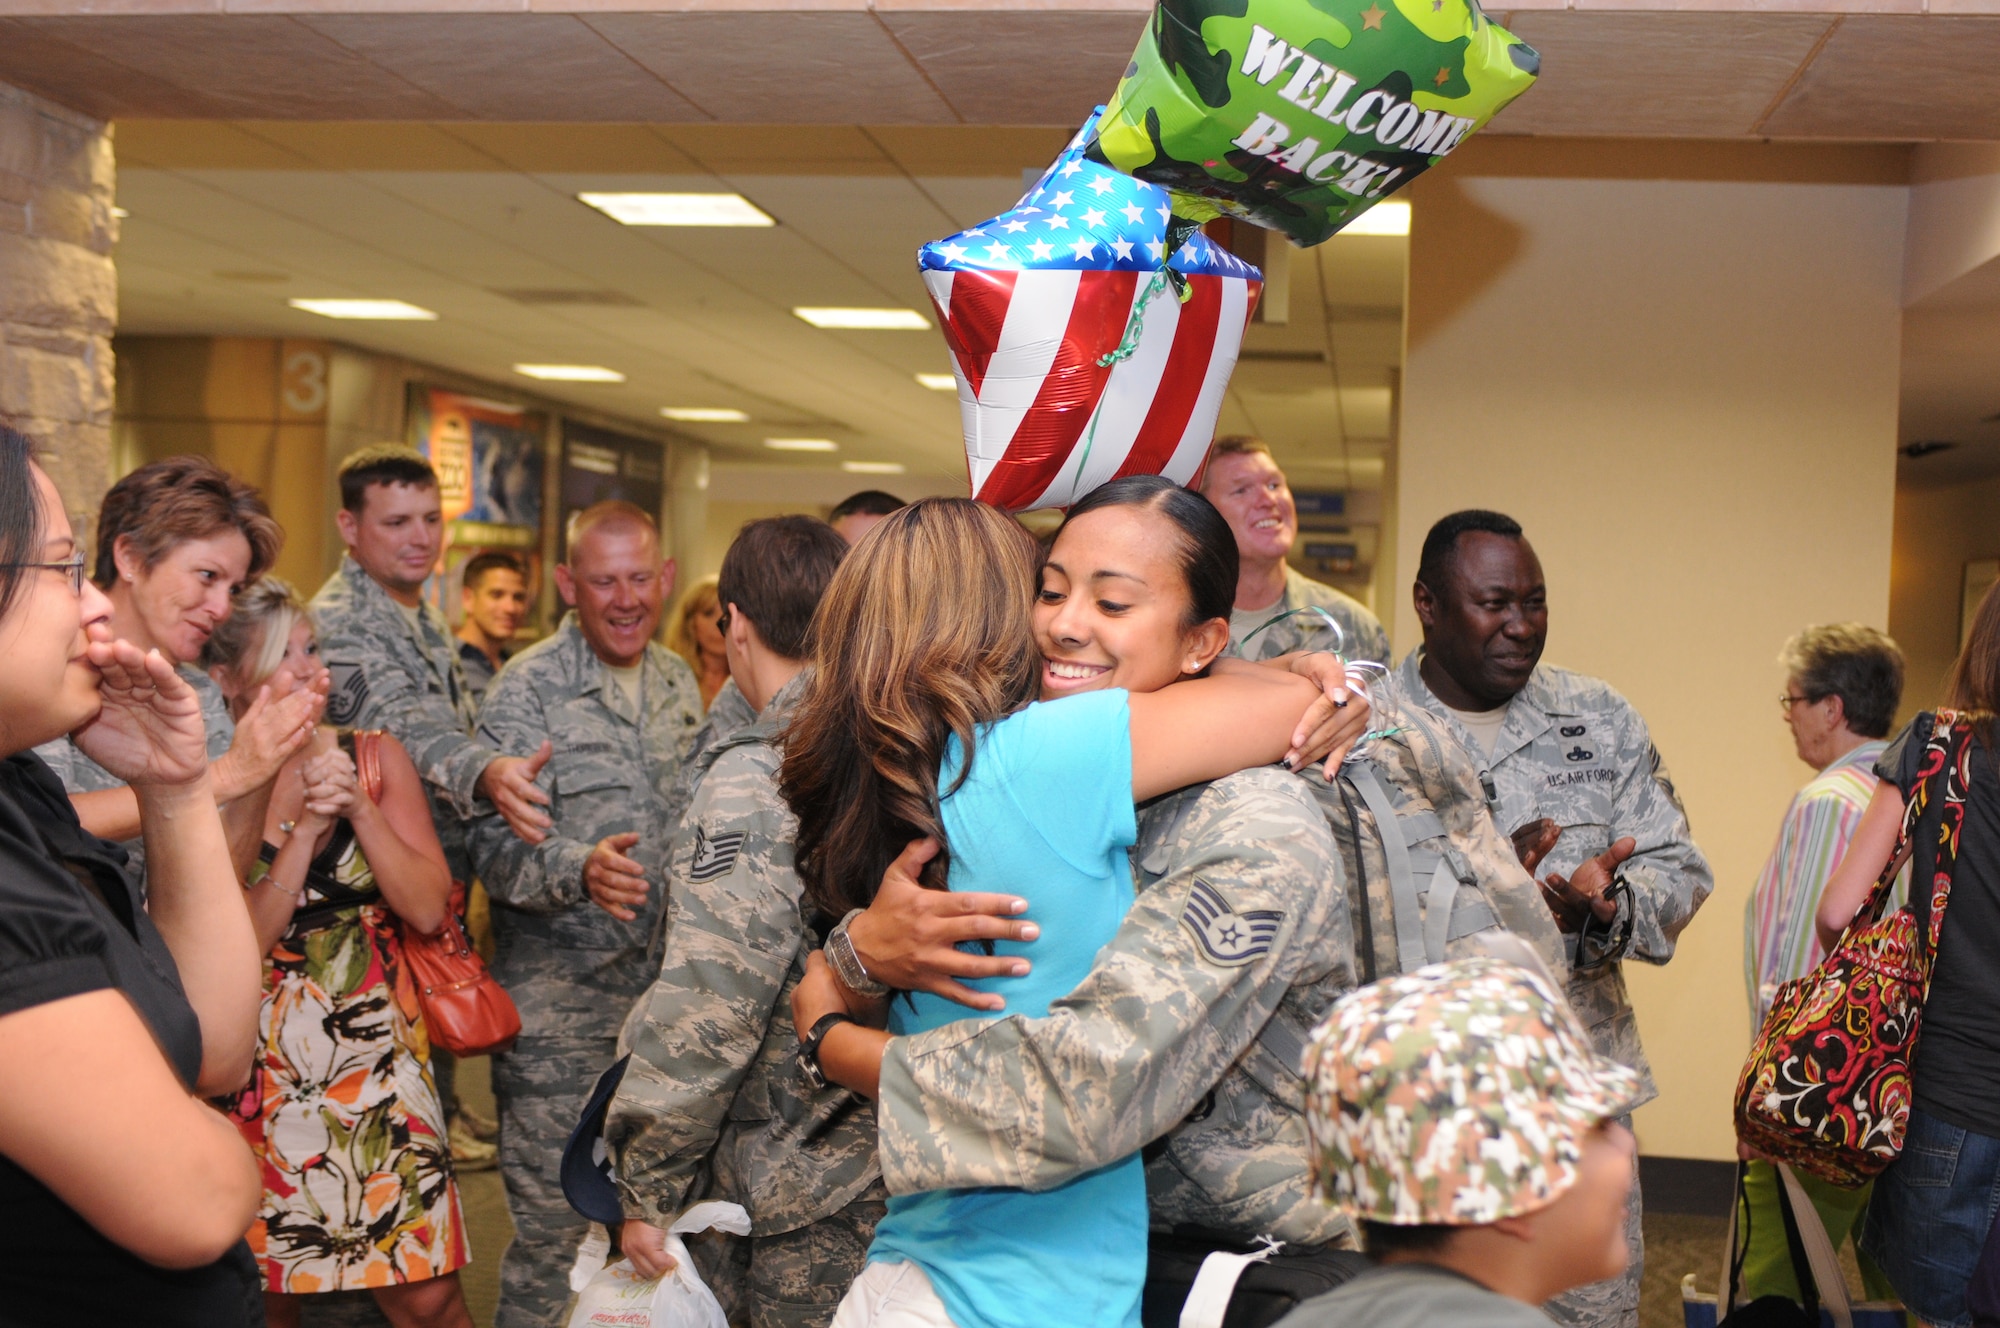 Staff Sgt. Patricia Pacheco is welcomed home after a five-month deployment to Iraq, June 7. Family and friends celebrated the return of 29 security forces Airmen assigned to the 162nd Fighter Wing at Tucson International Airport. (Air Force photo by Maj. Gabe Johnson)